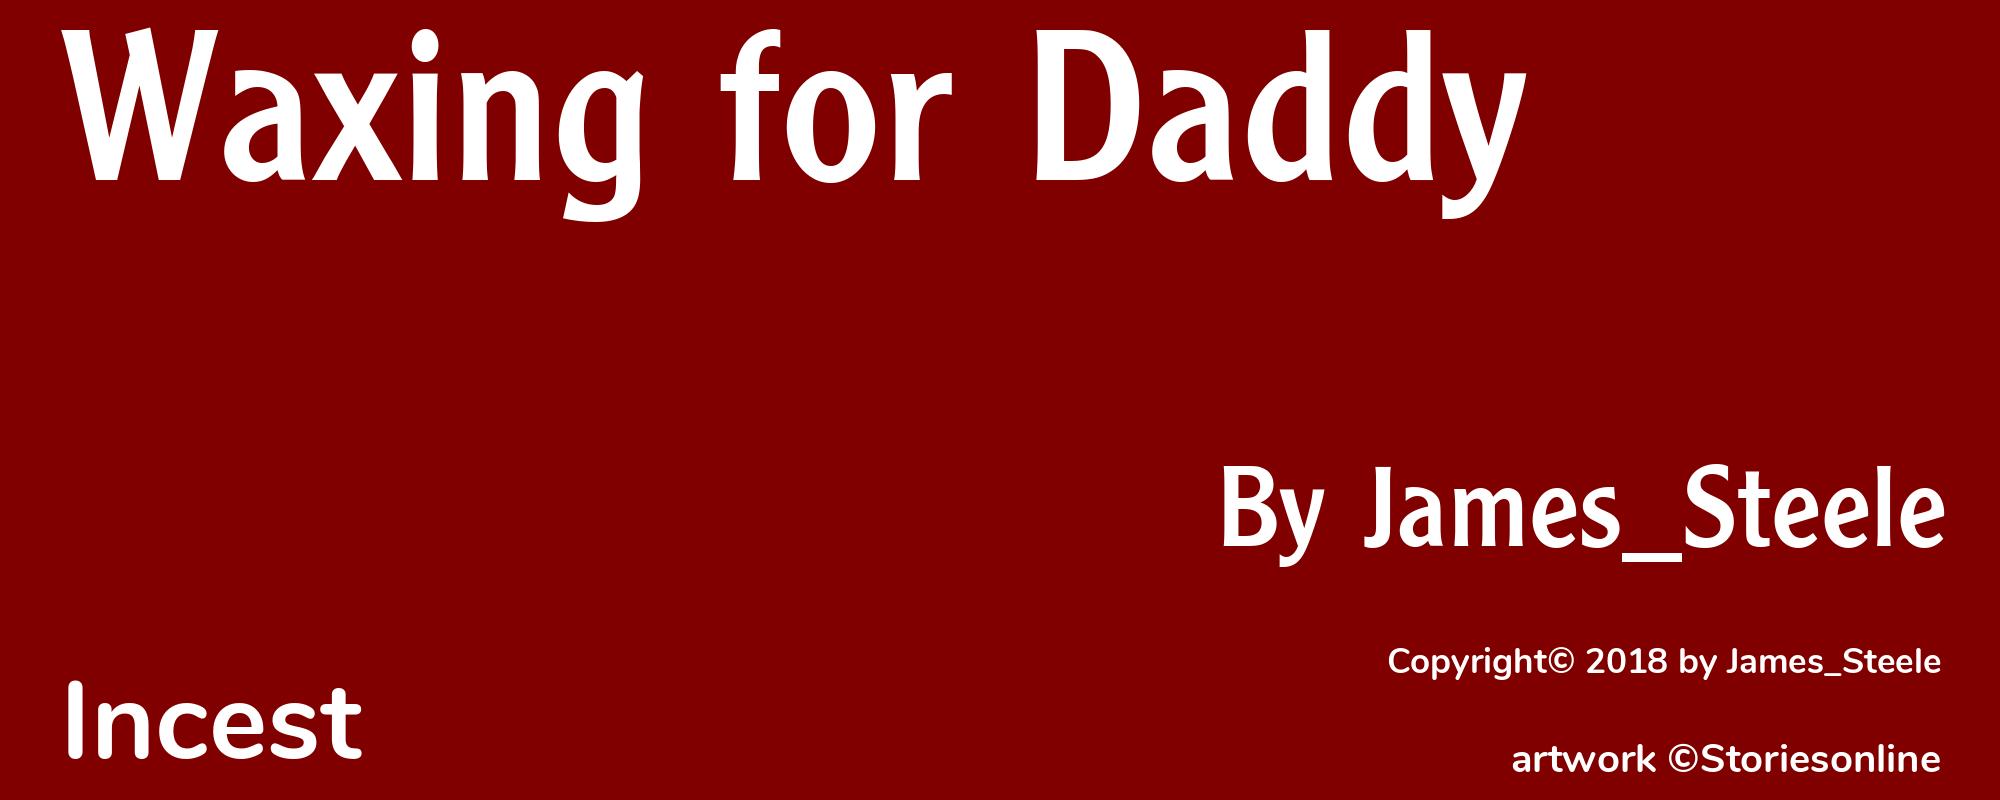 Waxing for Daddy - Cover